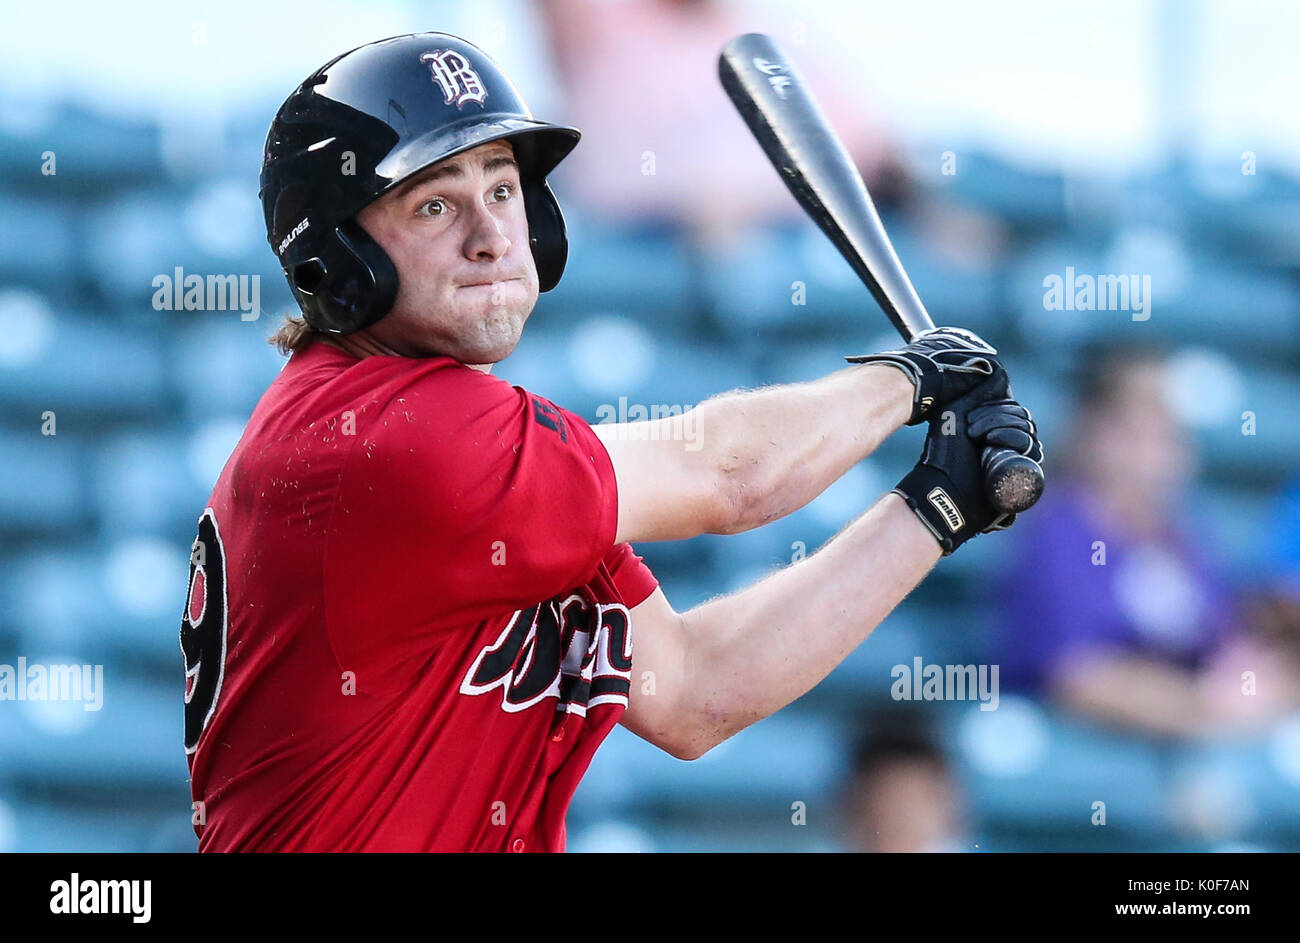 Aug. 22, 2017 Jacksonville, FL, US: Birmingham Barons center fielder Hunter Jones (29) at bat during the first game of an MiLB baseball doubleheader against the Jacksonville Jumbo Shrimp in Jacksonville, FL. Jacksonville defeated Birmingham 4 to 3. Gary McCullough/CSM Stock Photo